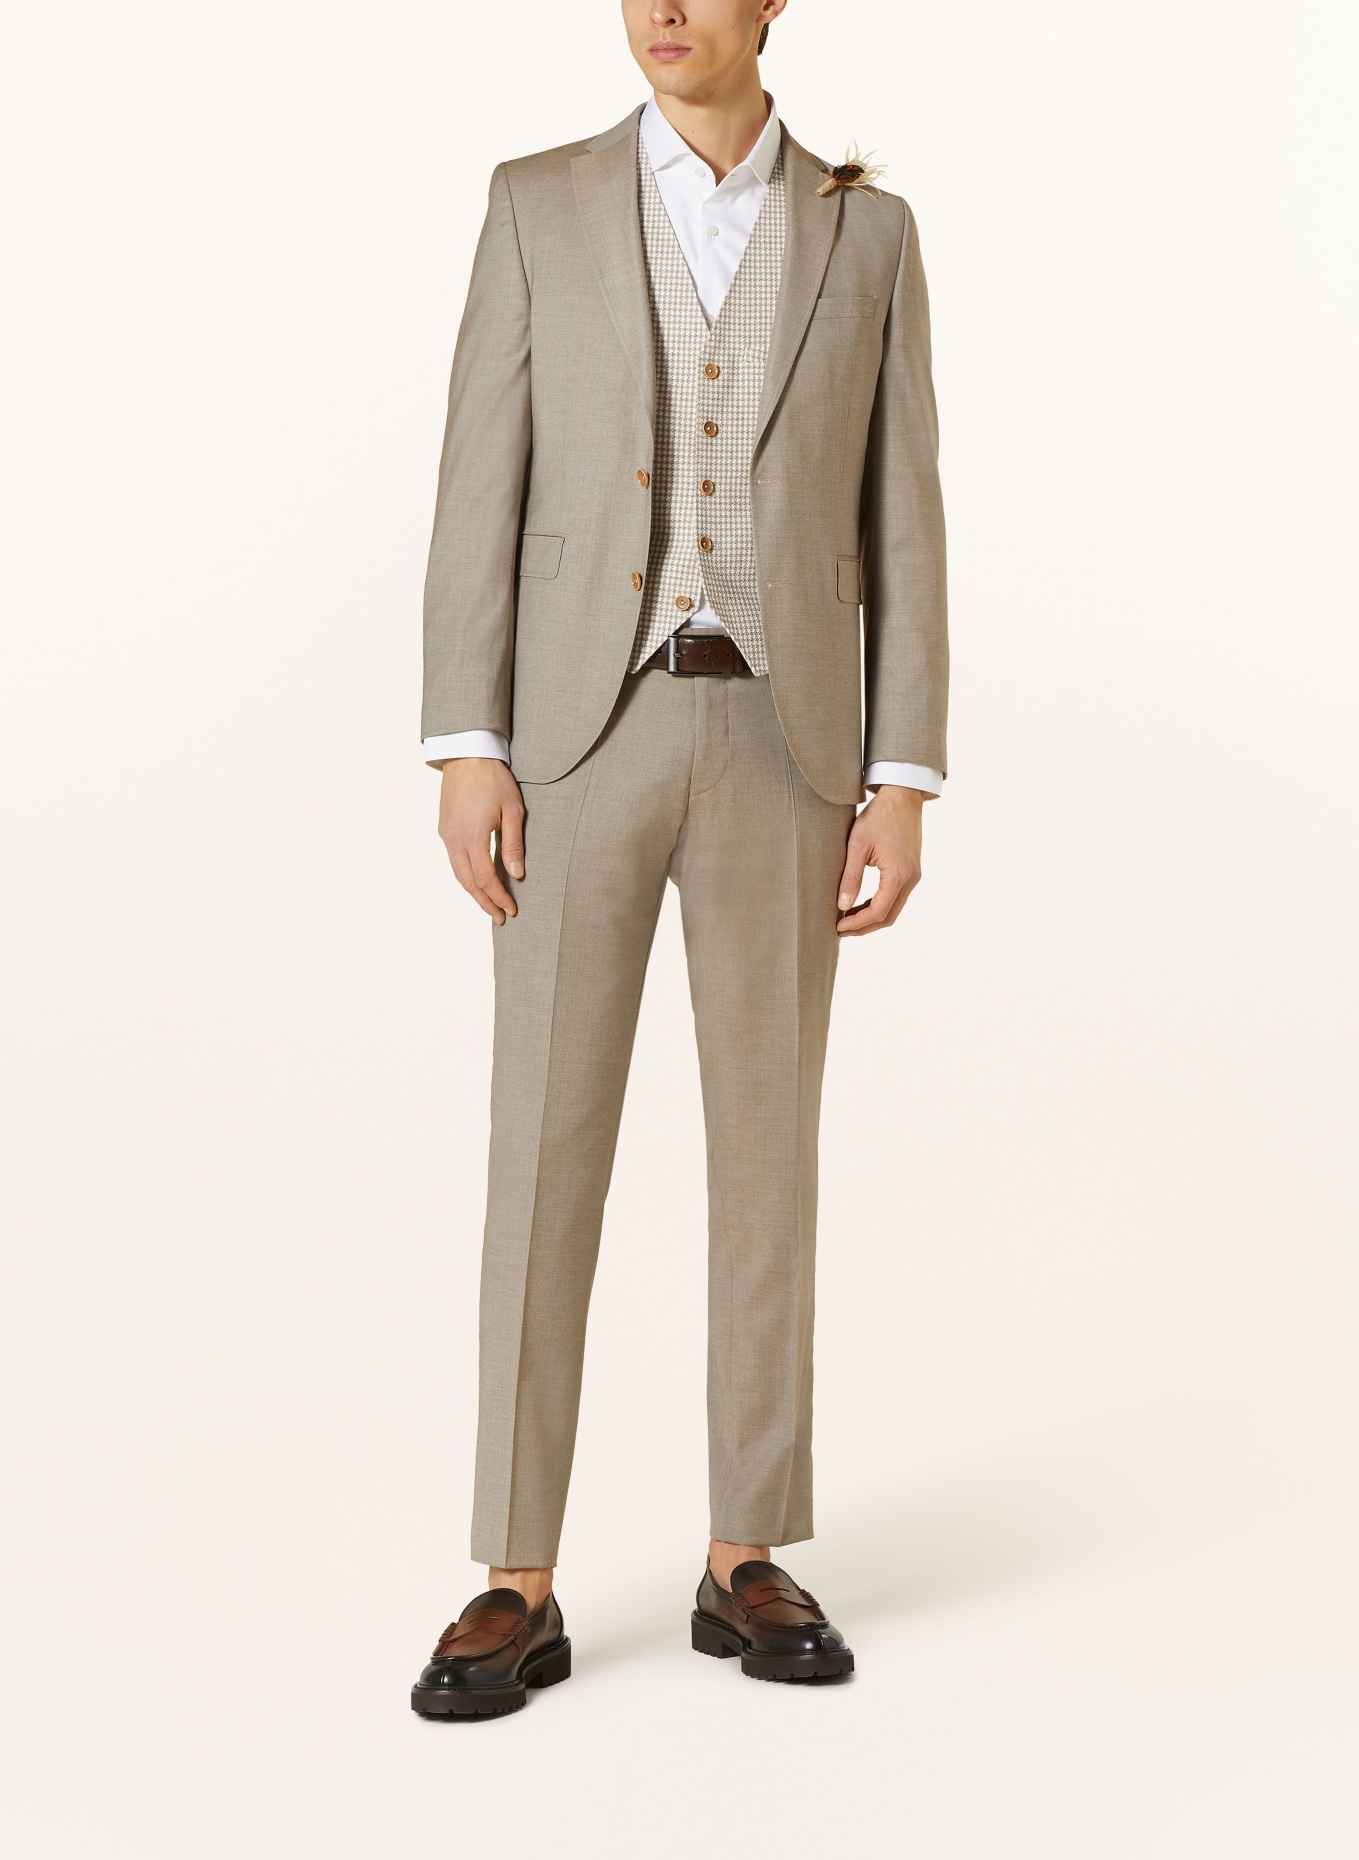 CG - CLUB of GENTS Suit trousers CG PACO slim fit, Color: 71 BRAUN HELL (Image 2)